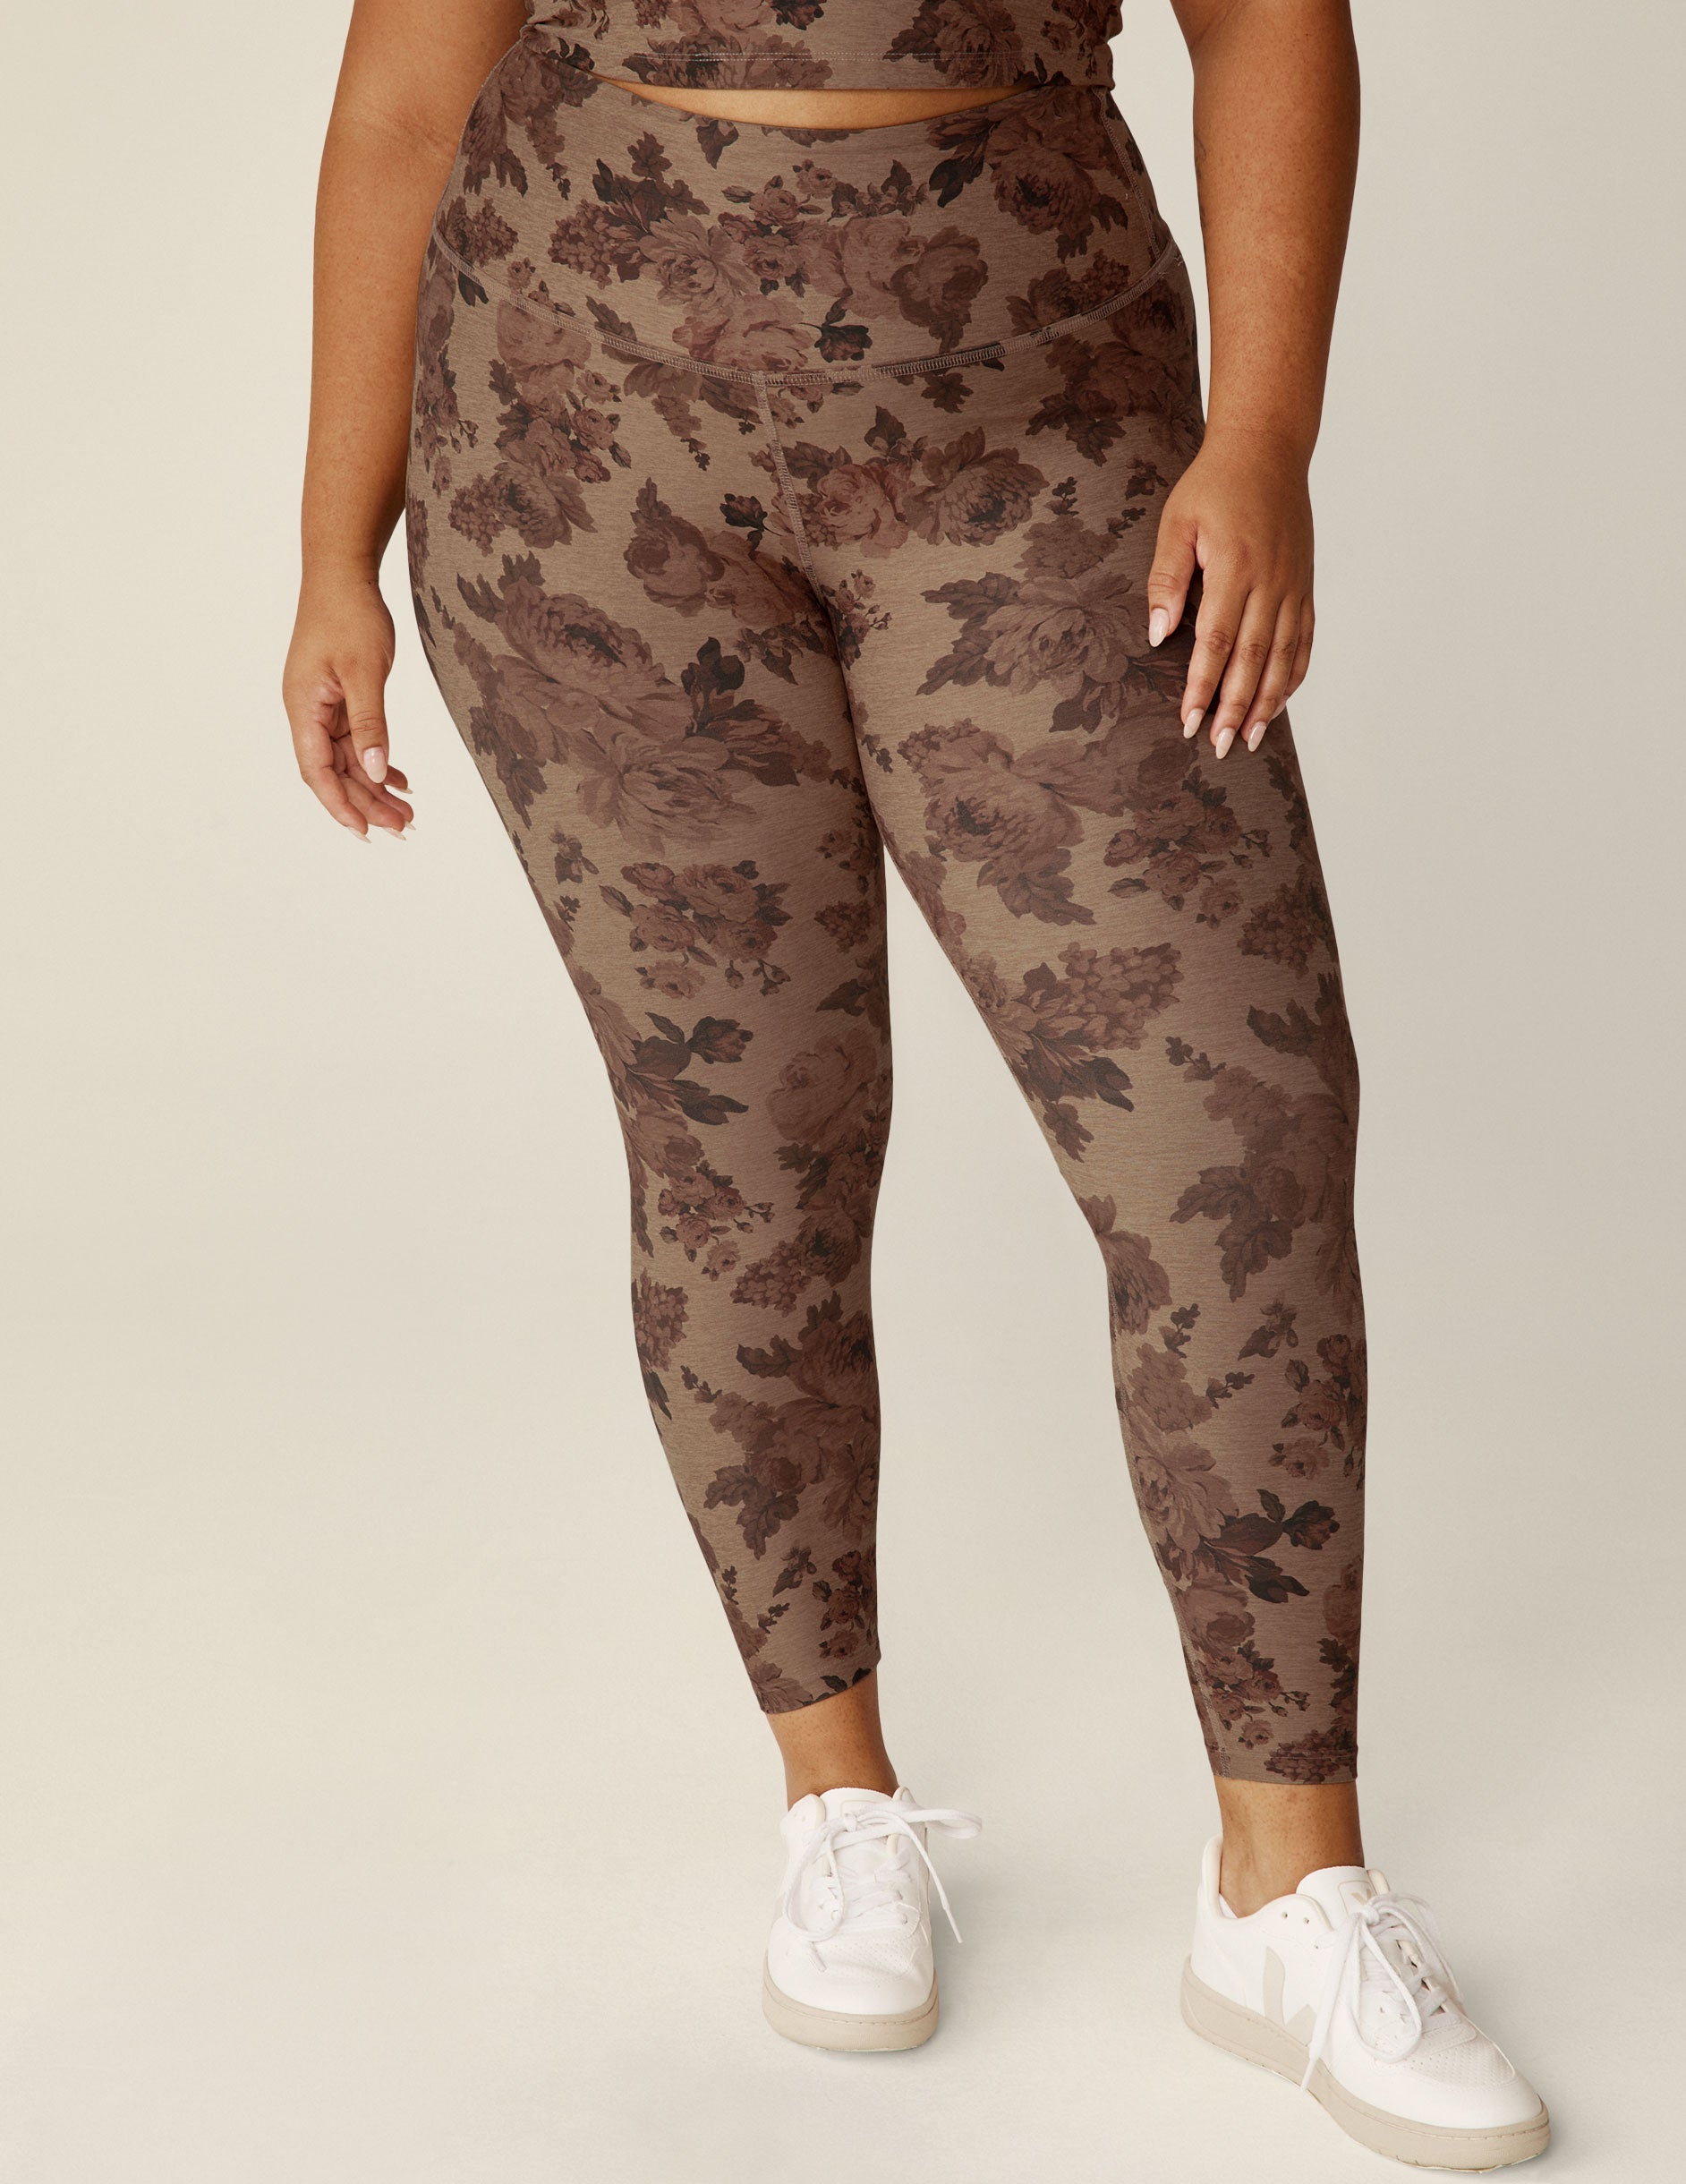 H & M Floral Stretch Yoga Full Workout Casual Lounge Leggings